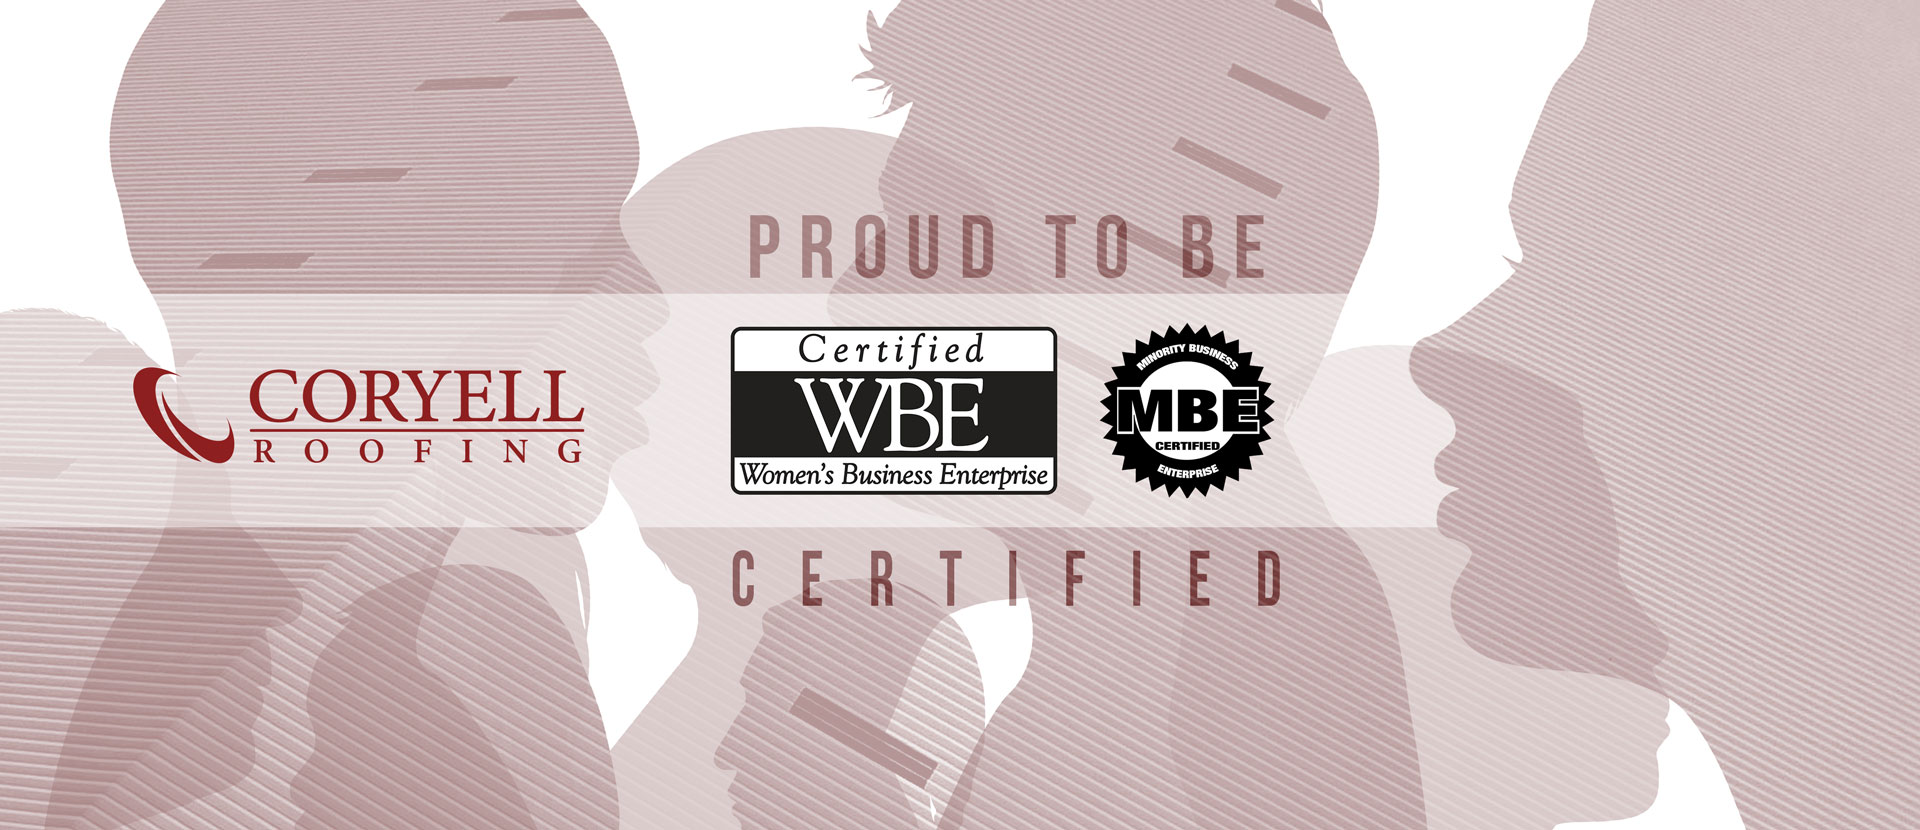 Benefits of working with W/MBE certified contractors like Coryell Roofing